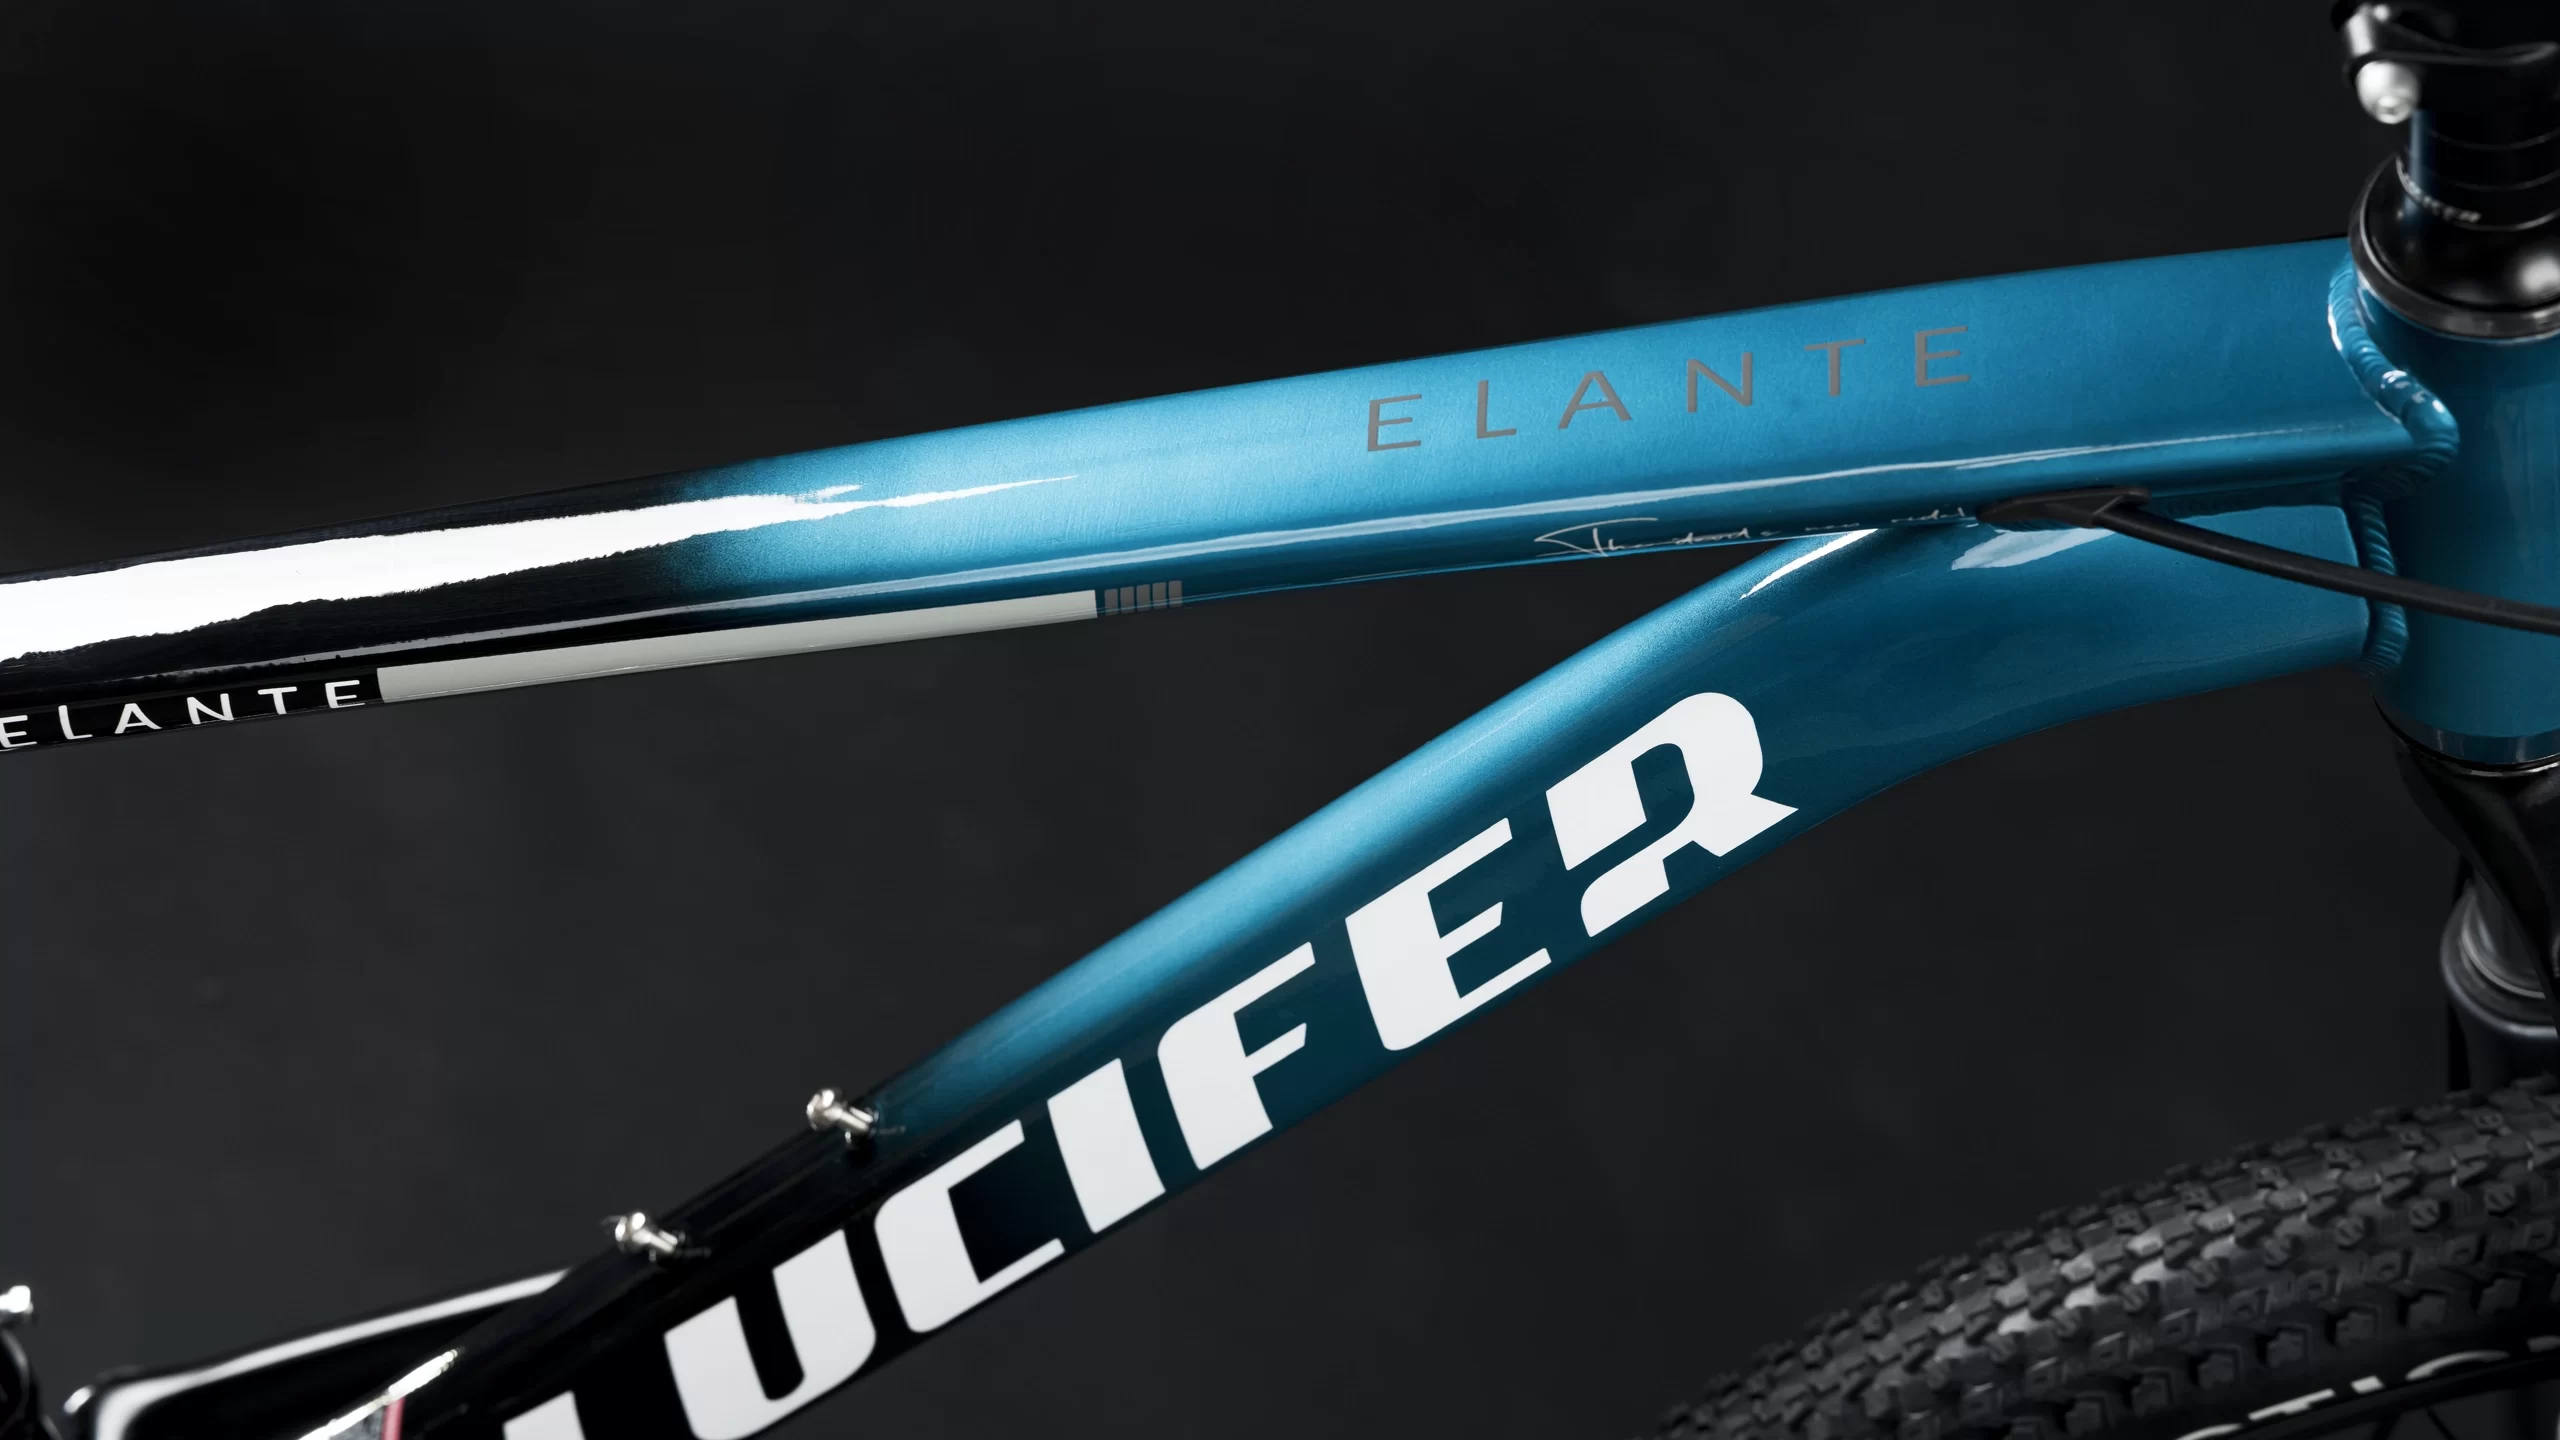 Top Tube of Lucifer Bikes Affordable Alloy Cycle Elante